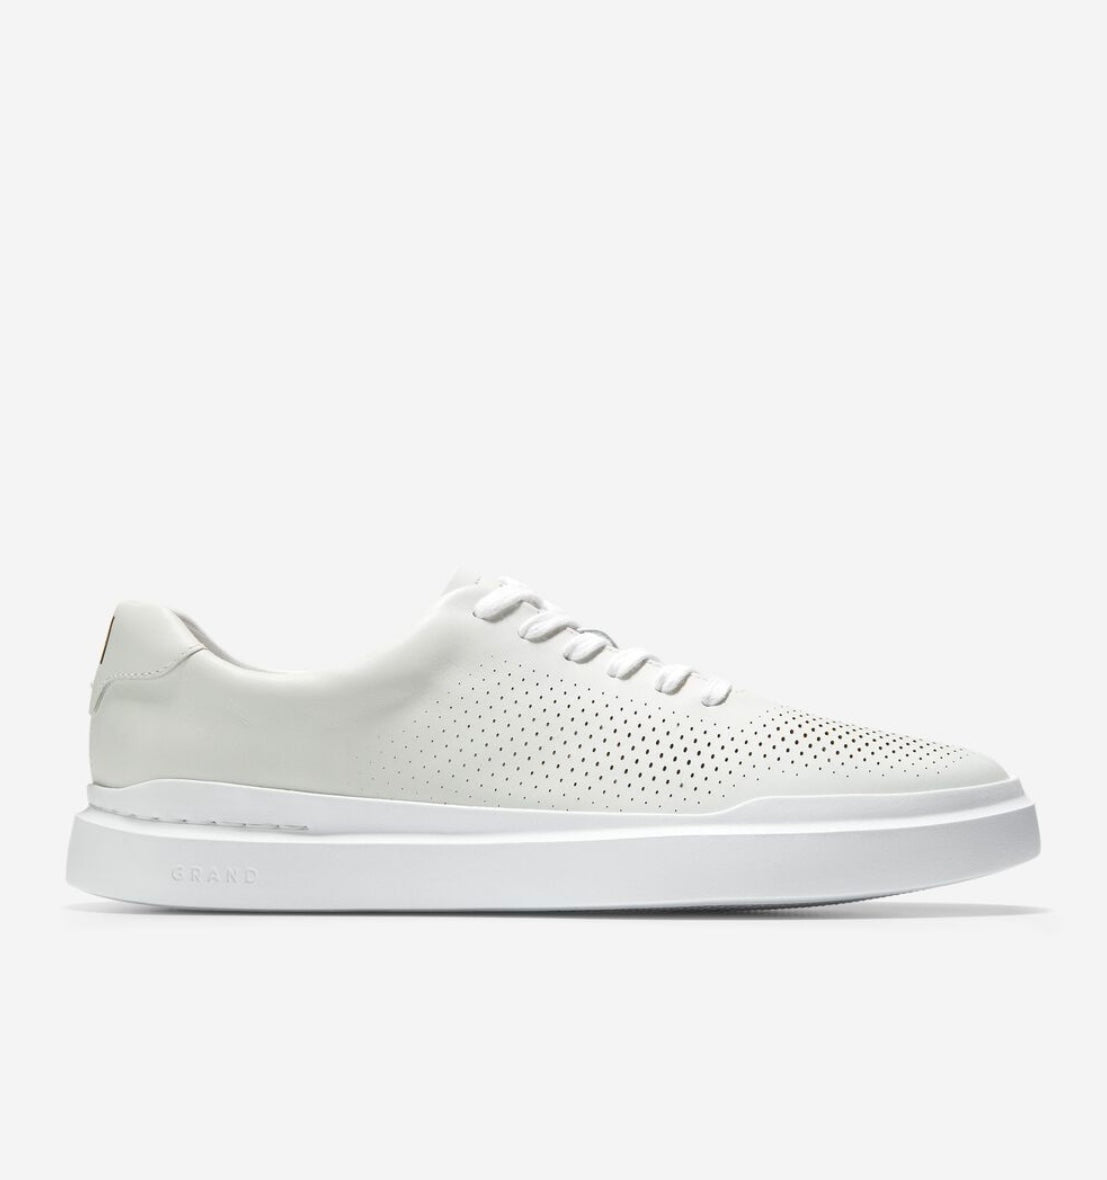 Cole Haan GrandPro Rally Laser cut sneakers - White